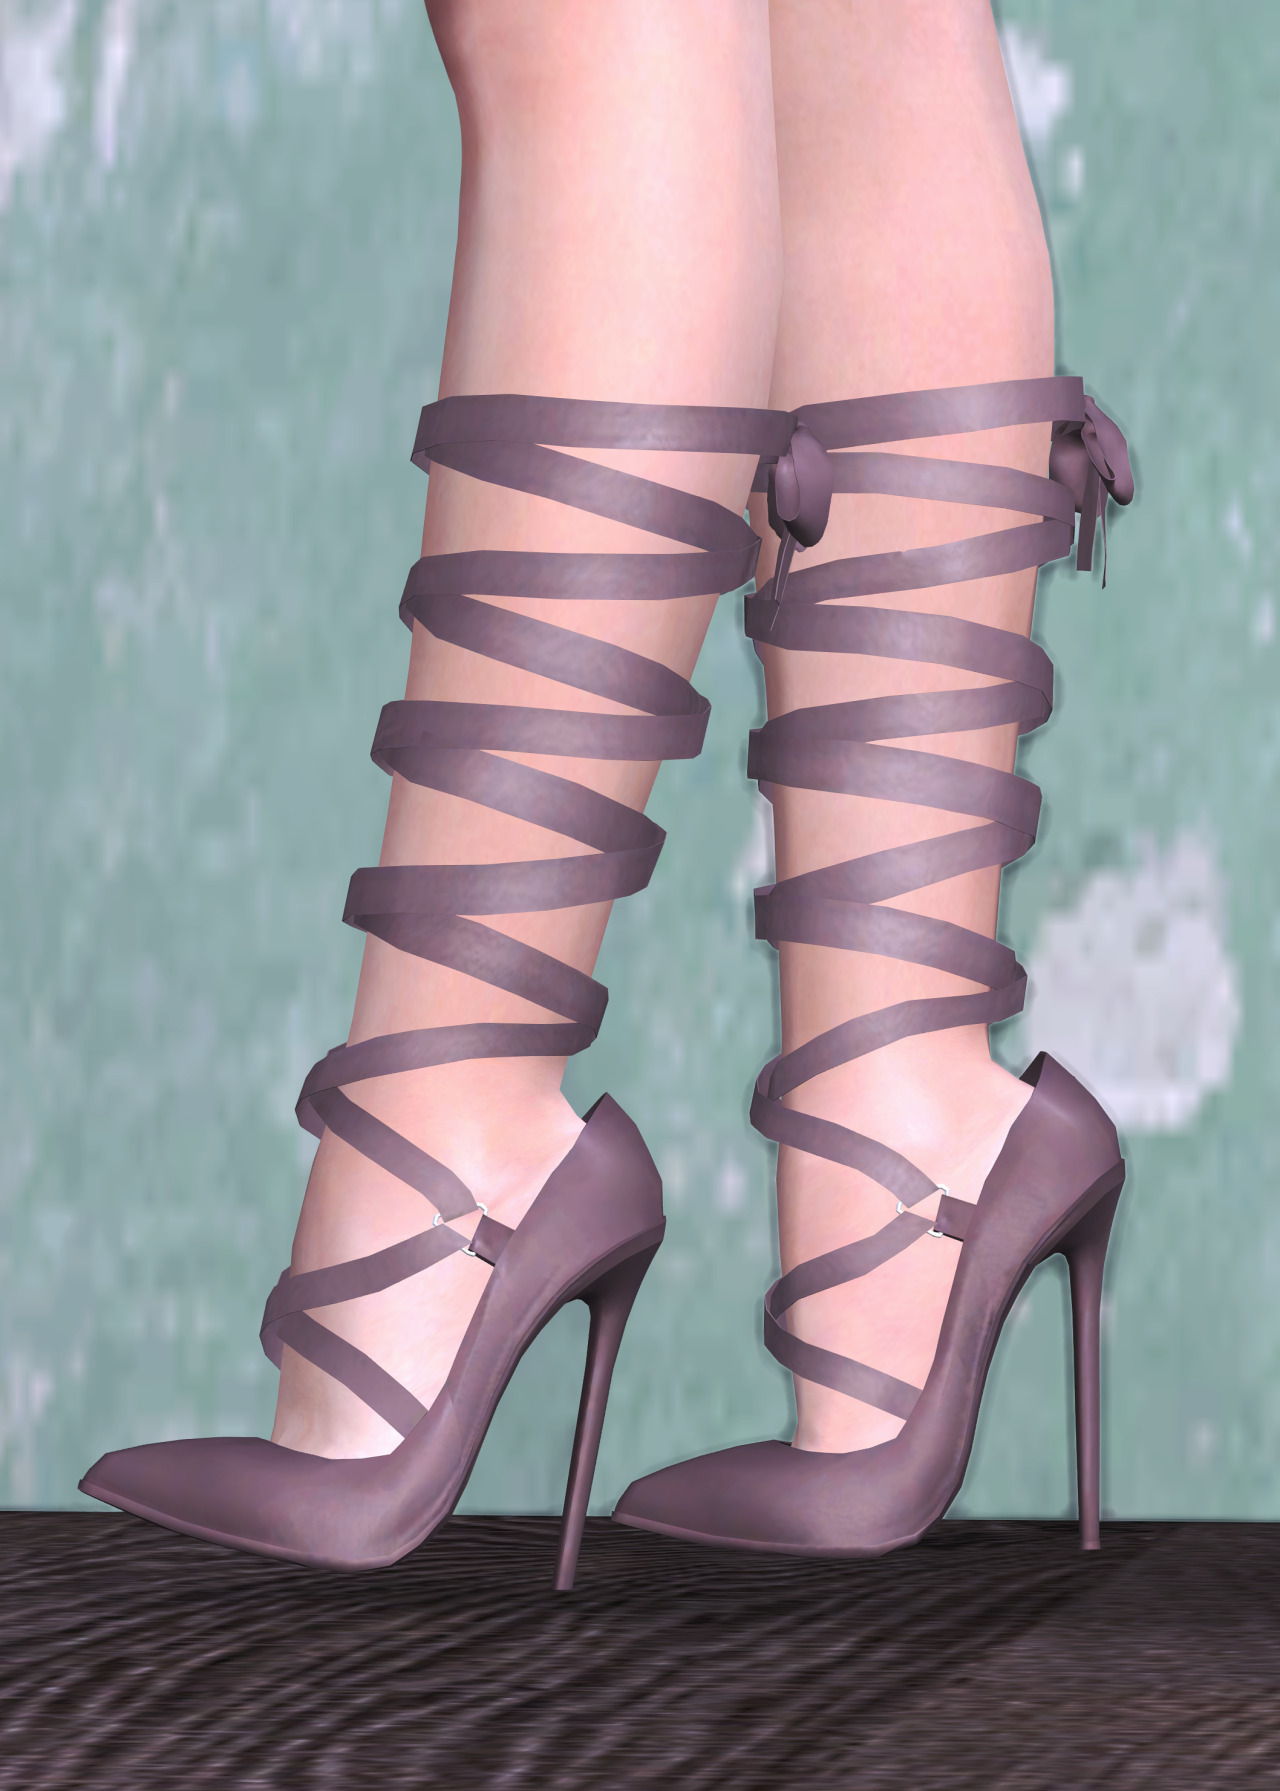 astya96cc: February Shoes Collection stiletto... - Emily CC Finds